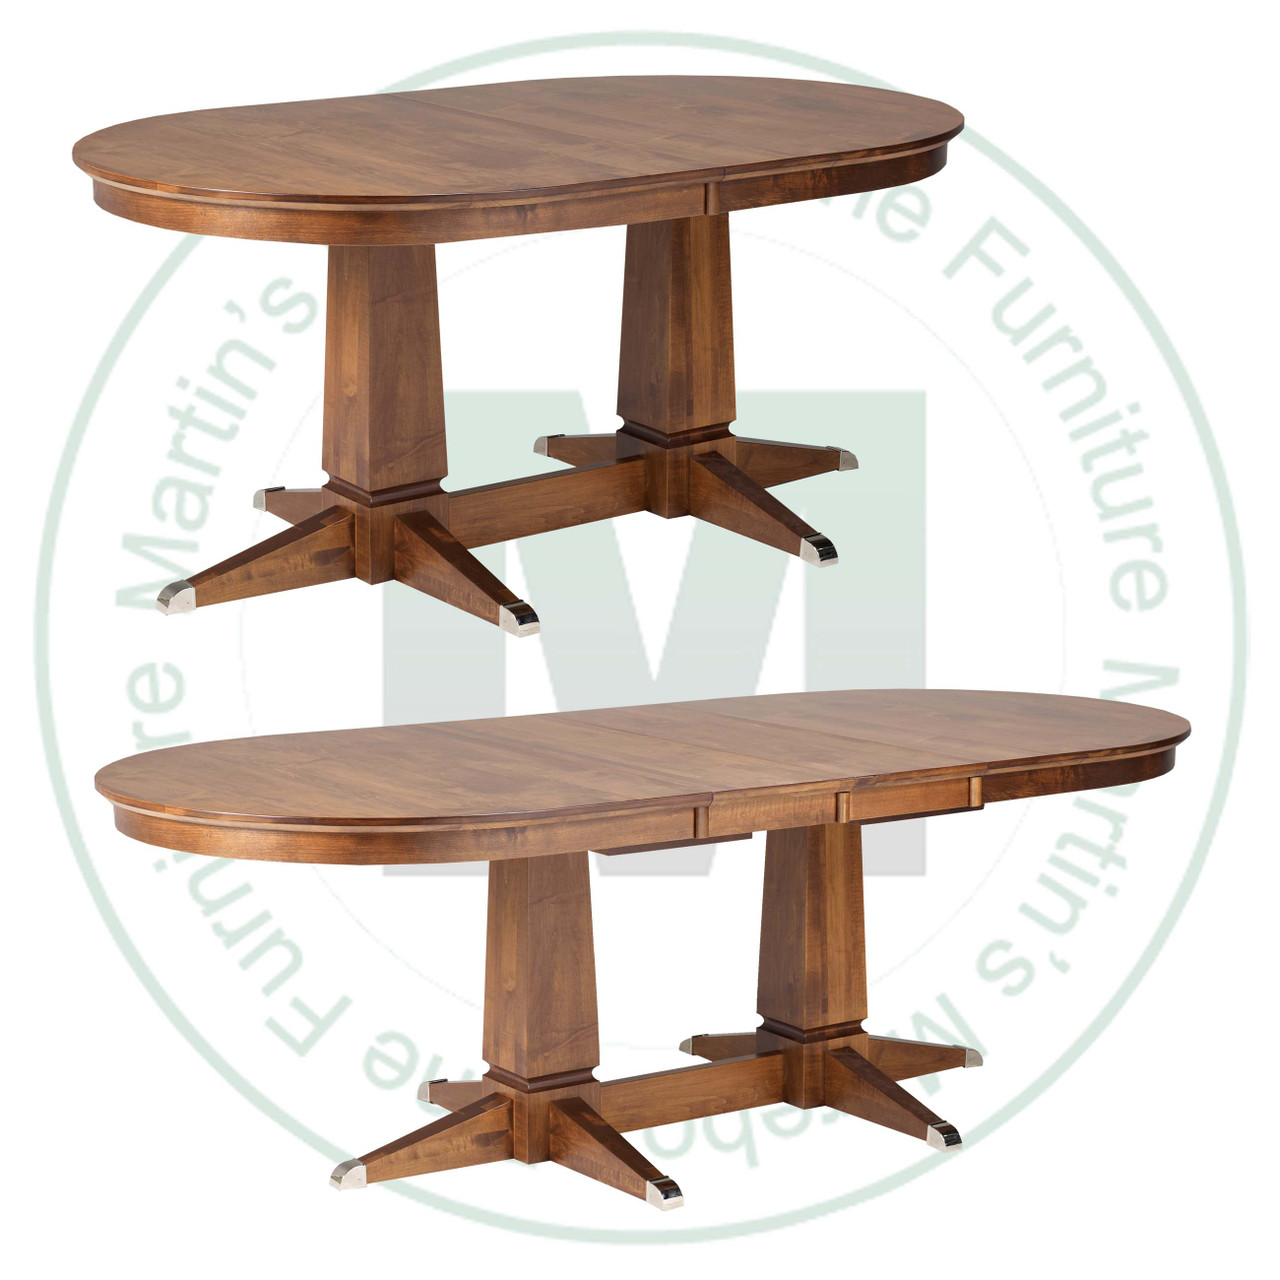 Maple Sweden Double Pedestal Table 48''D x 72''W x 30''H With 3 - 12'' Leaves